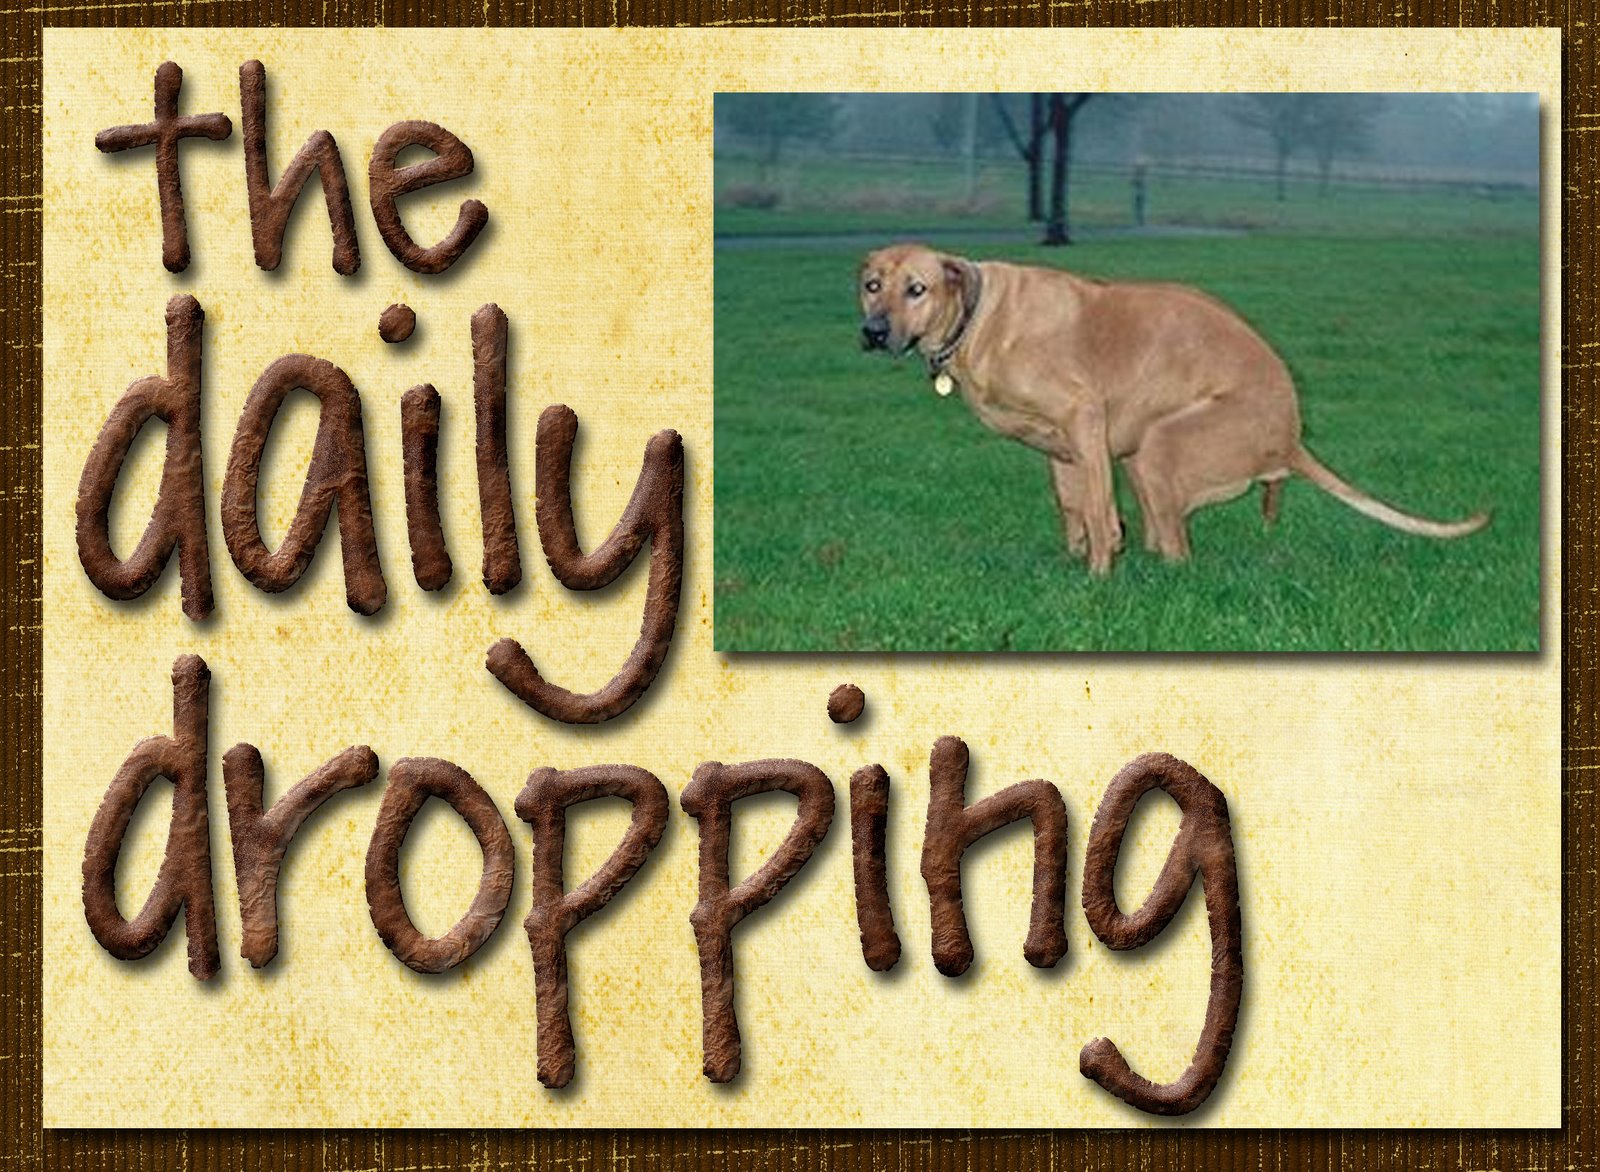 The Daily Dropping